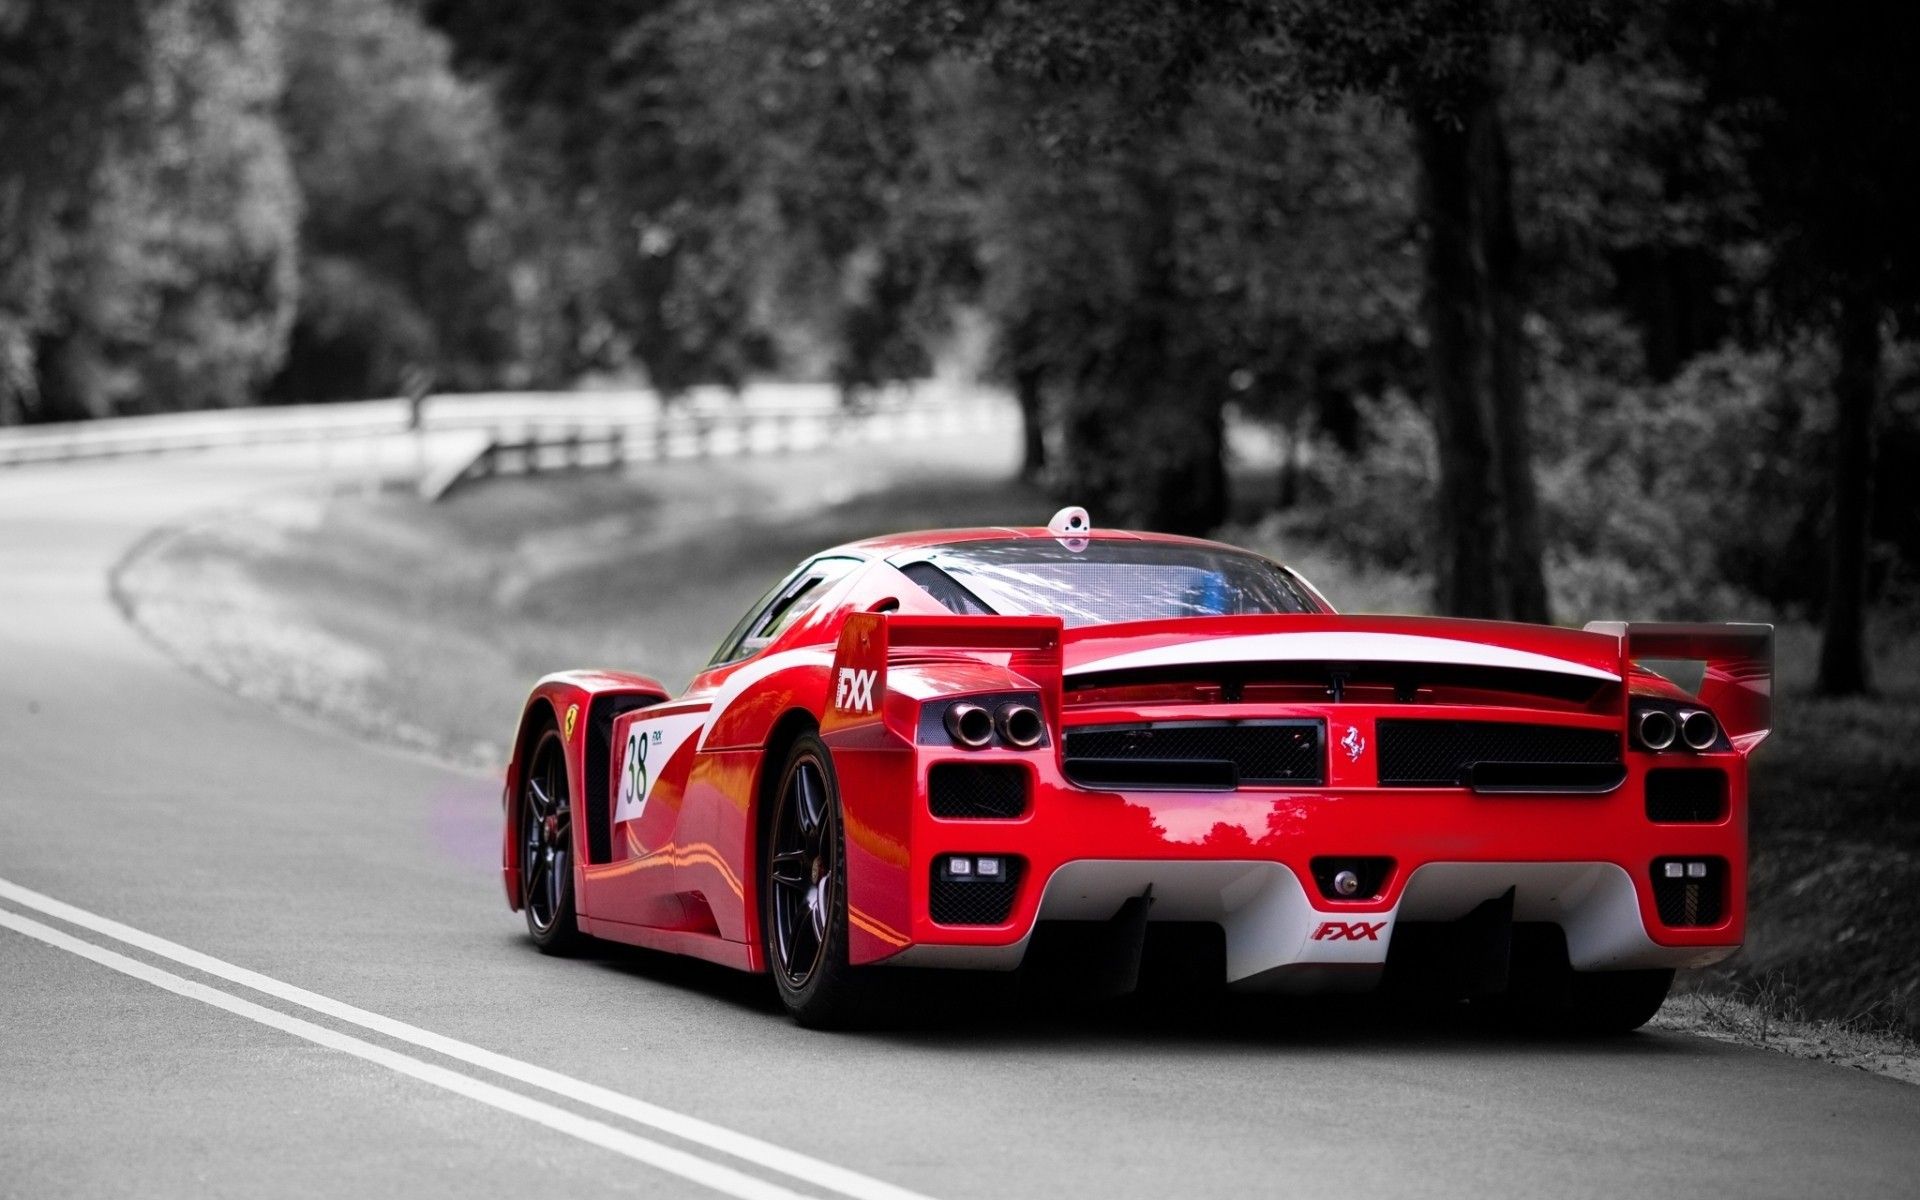 Red and Black Car Wallpaper Free Red and Black Car Background